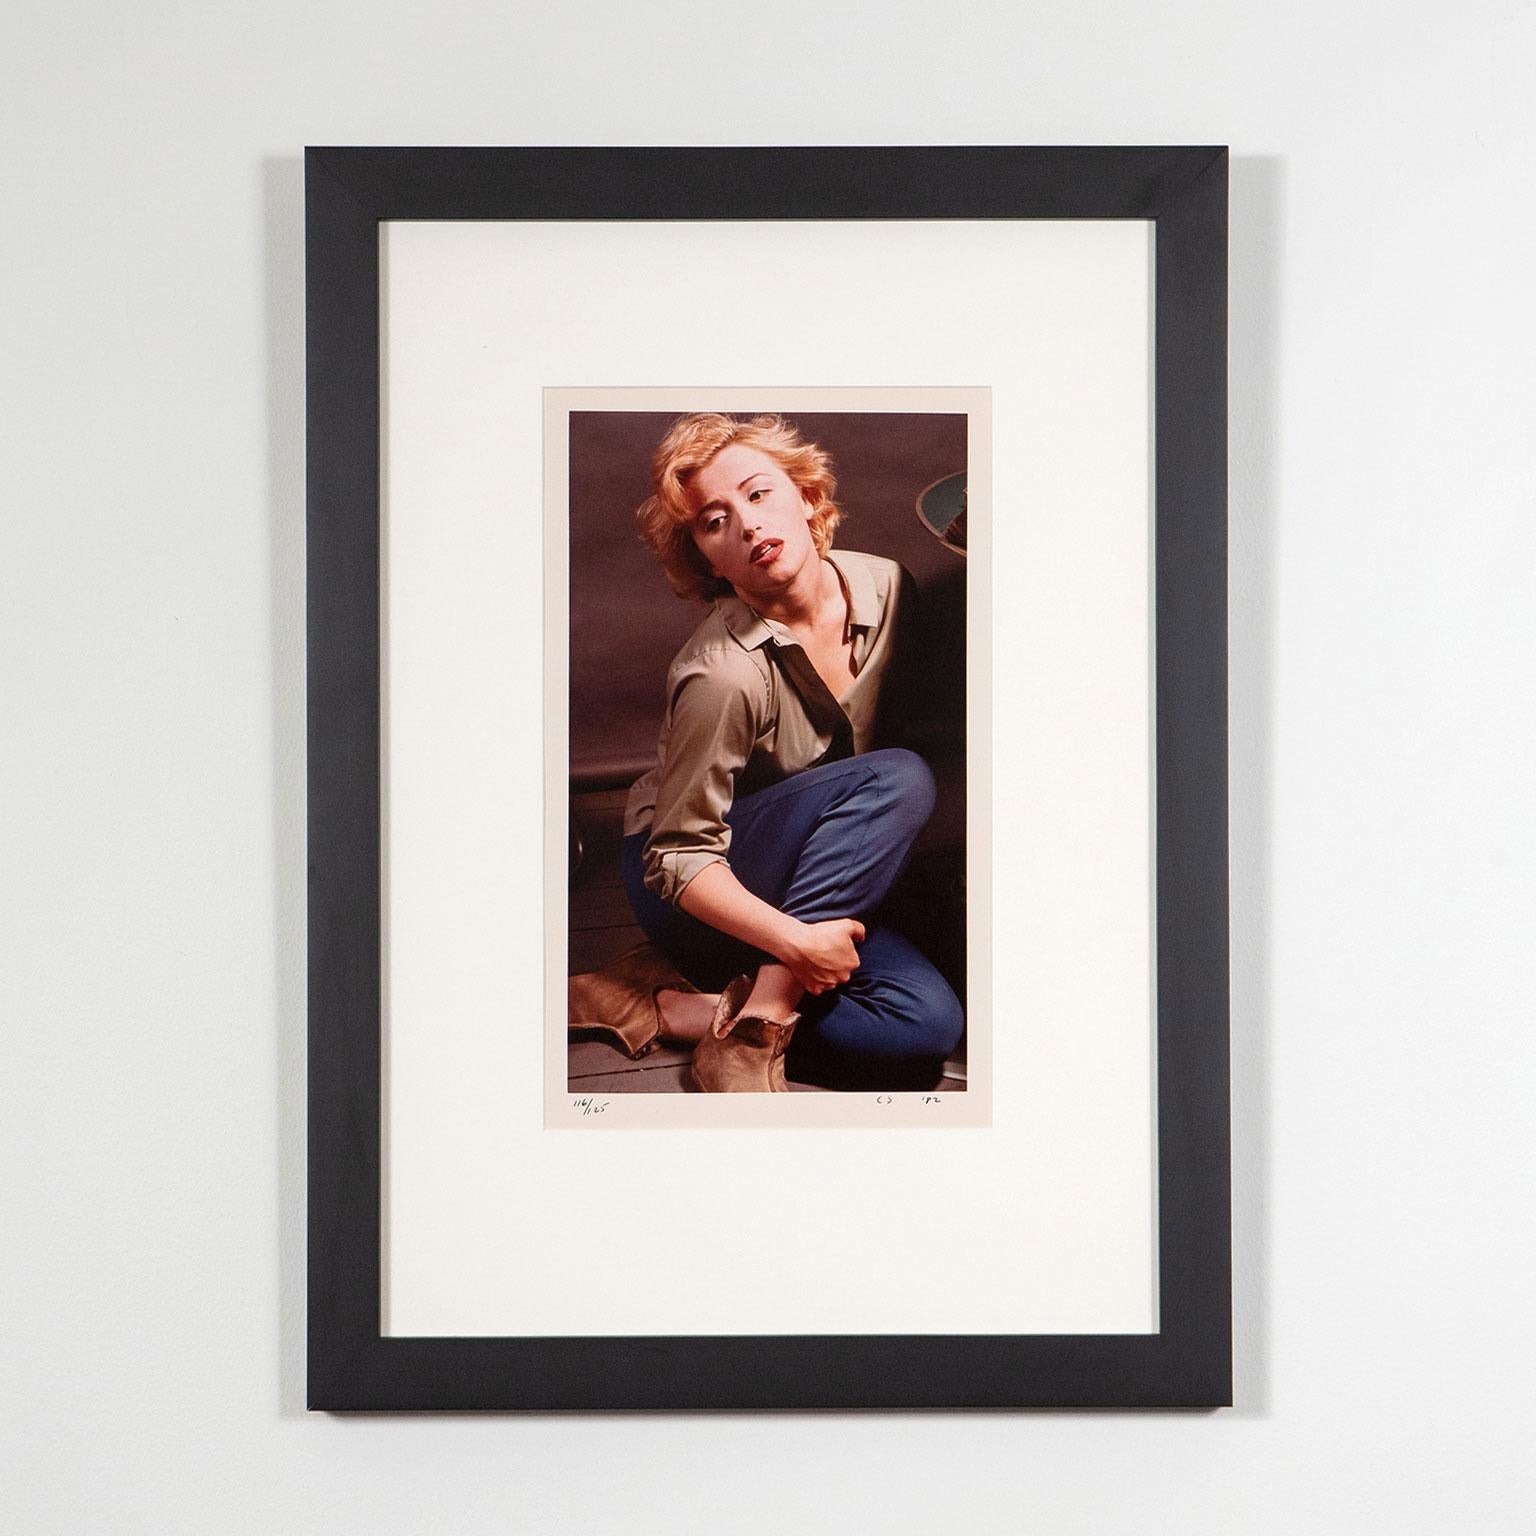 Untitled (Marilyn Monroe) - Photograph by Cindy Sherman